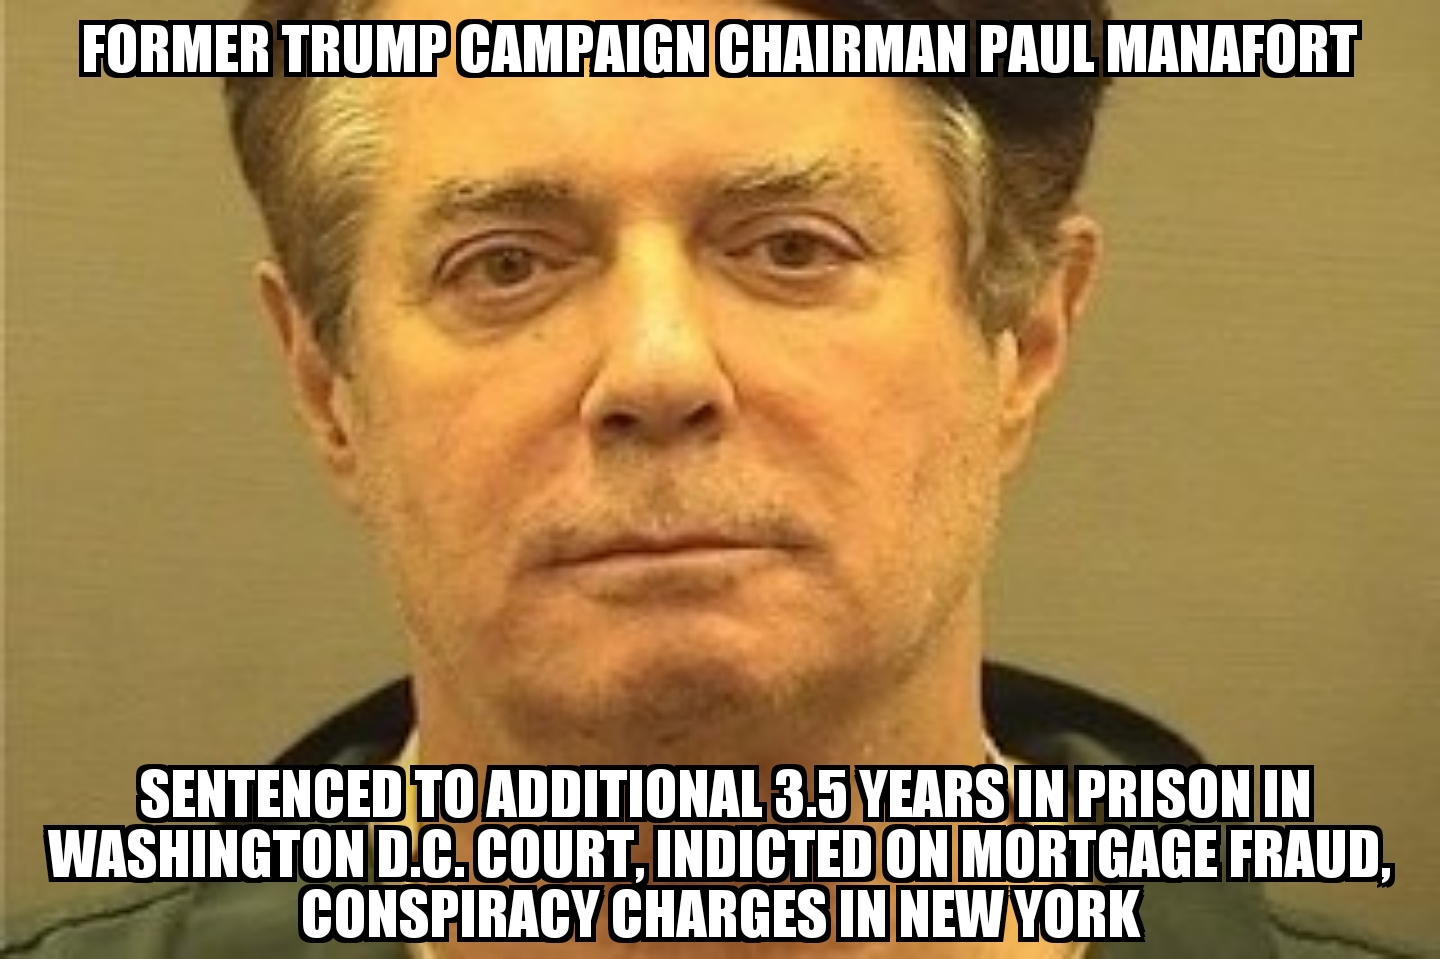 Former Trump campaign chair Paul Manafort sentenced to 3.5 more years, indicted in New York